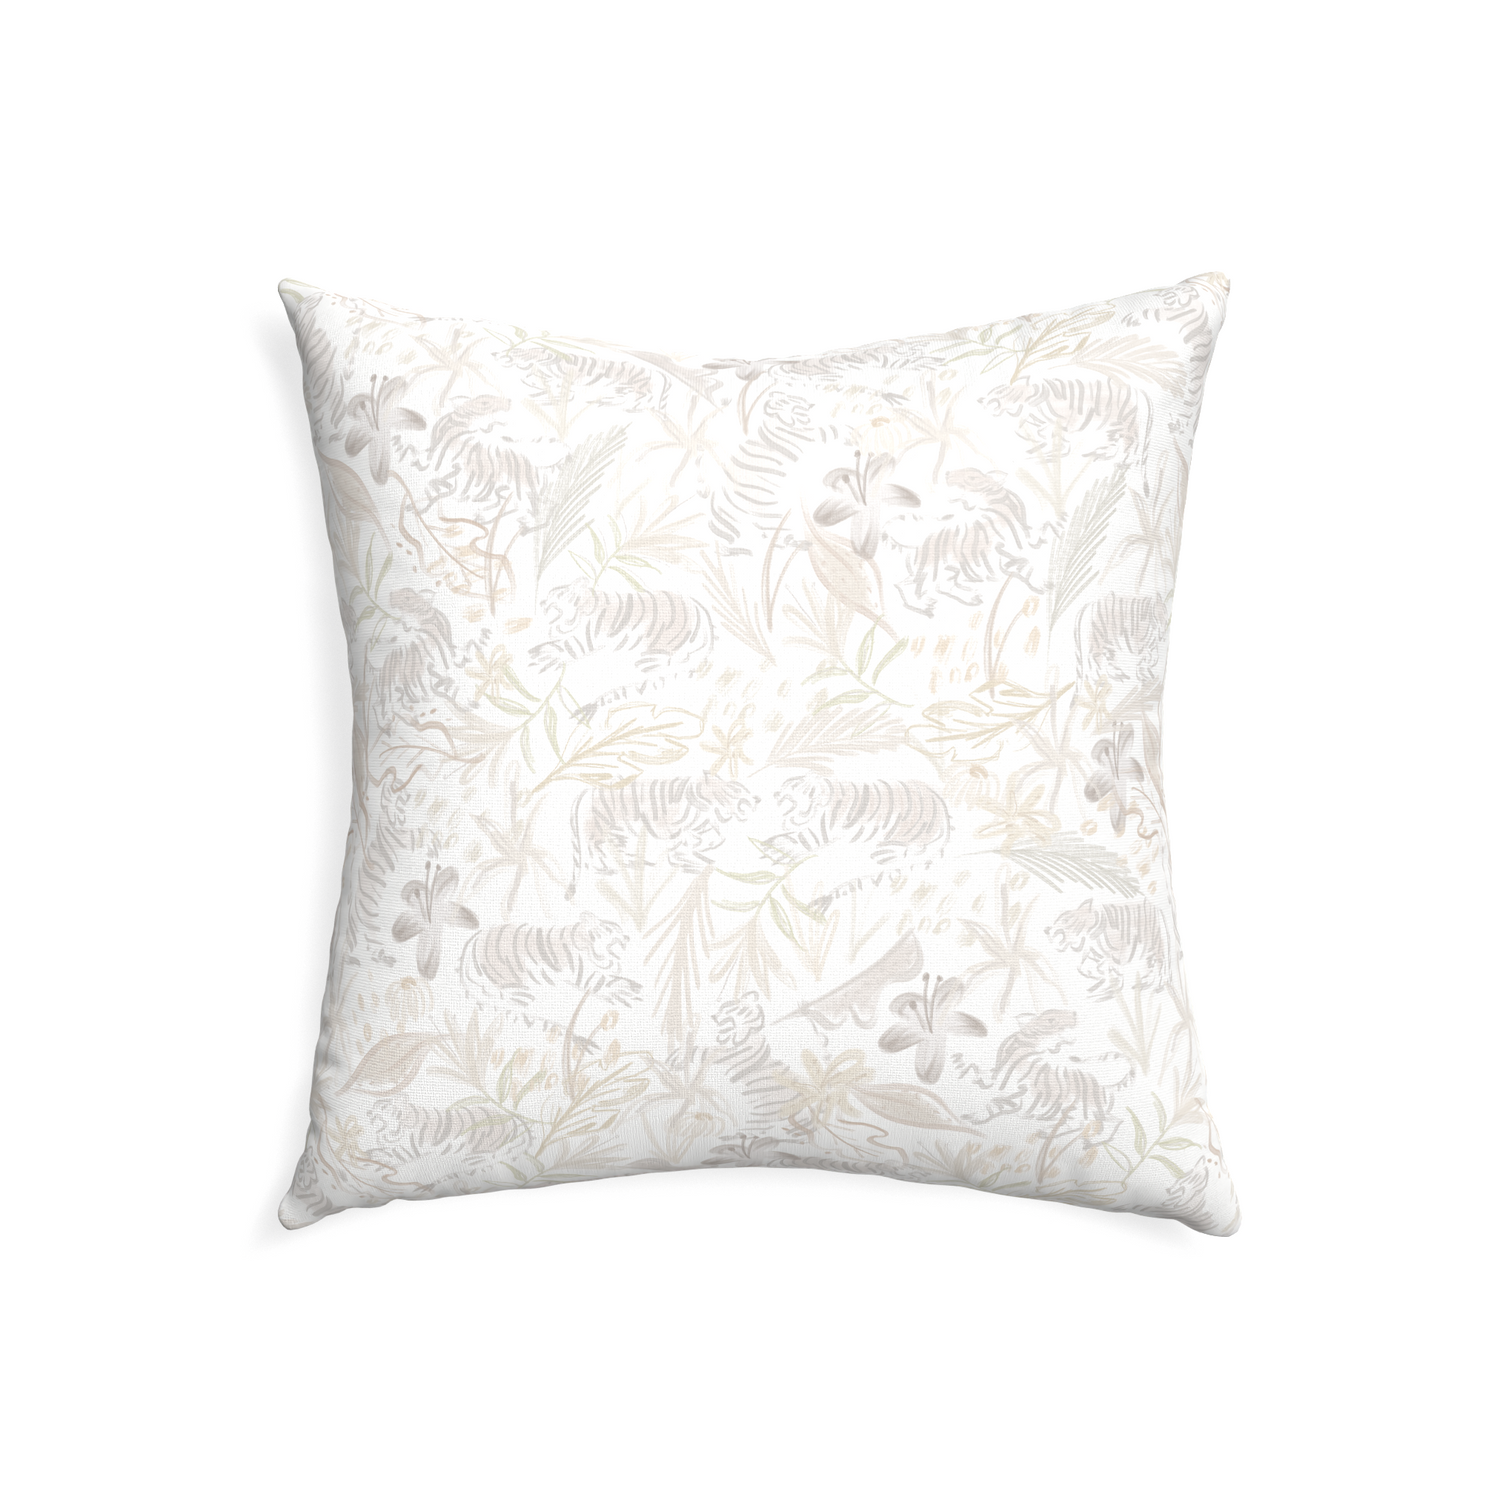 22-square frida sand custom beige chinoiserie tigerpillow with none on white background